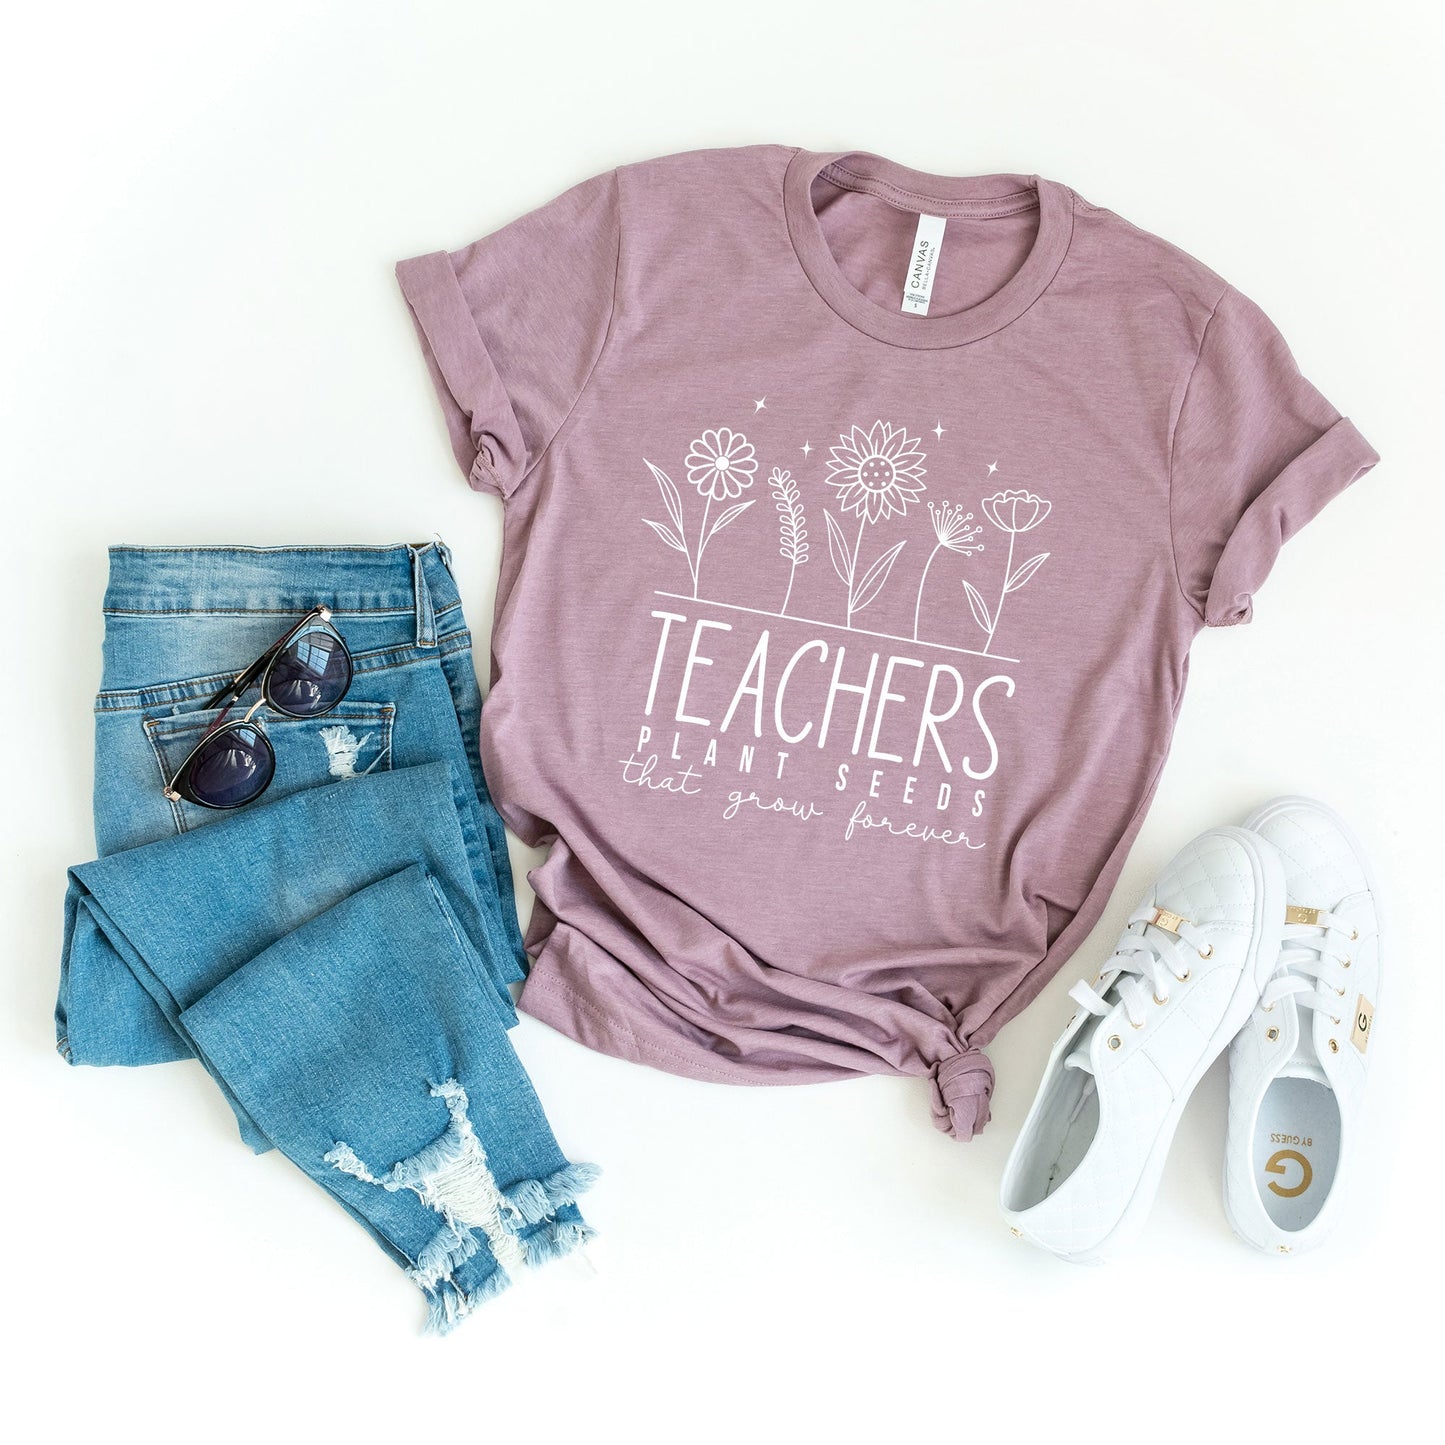 Clearance Teachers Plant Seeds That Grow Forever | Short Sleeve Graphic Tee